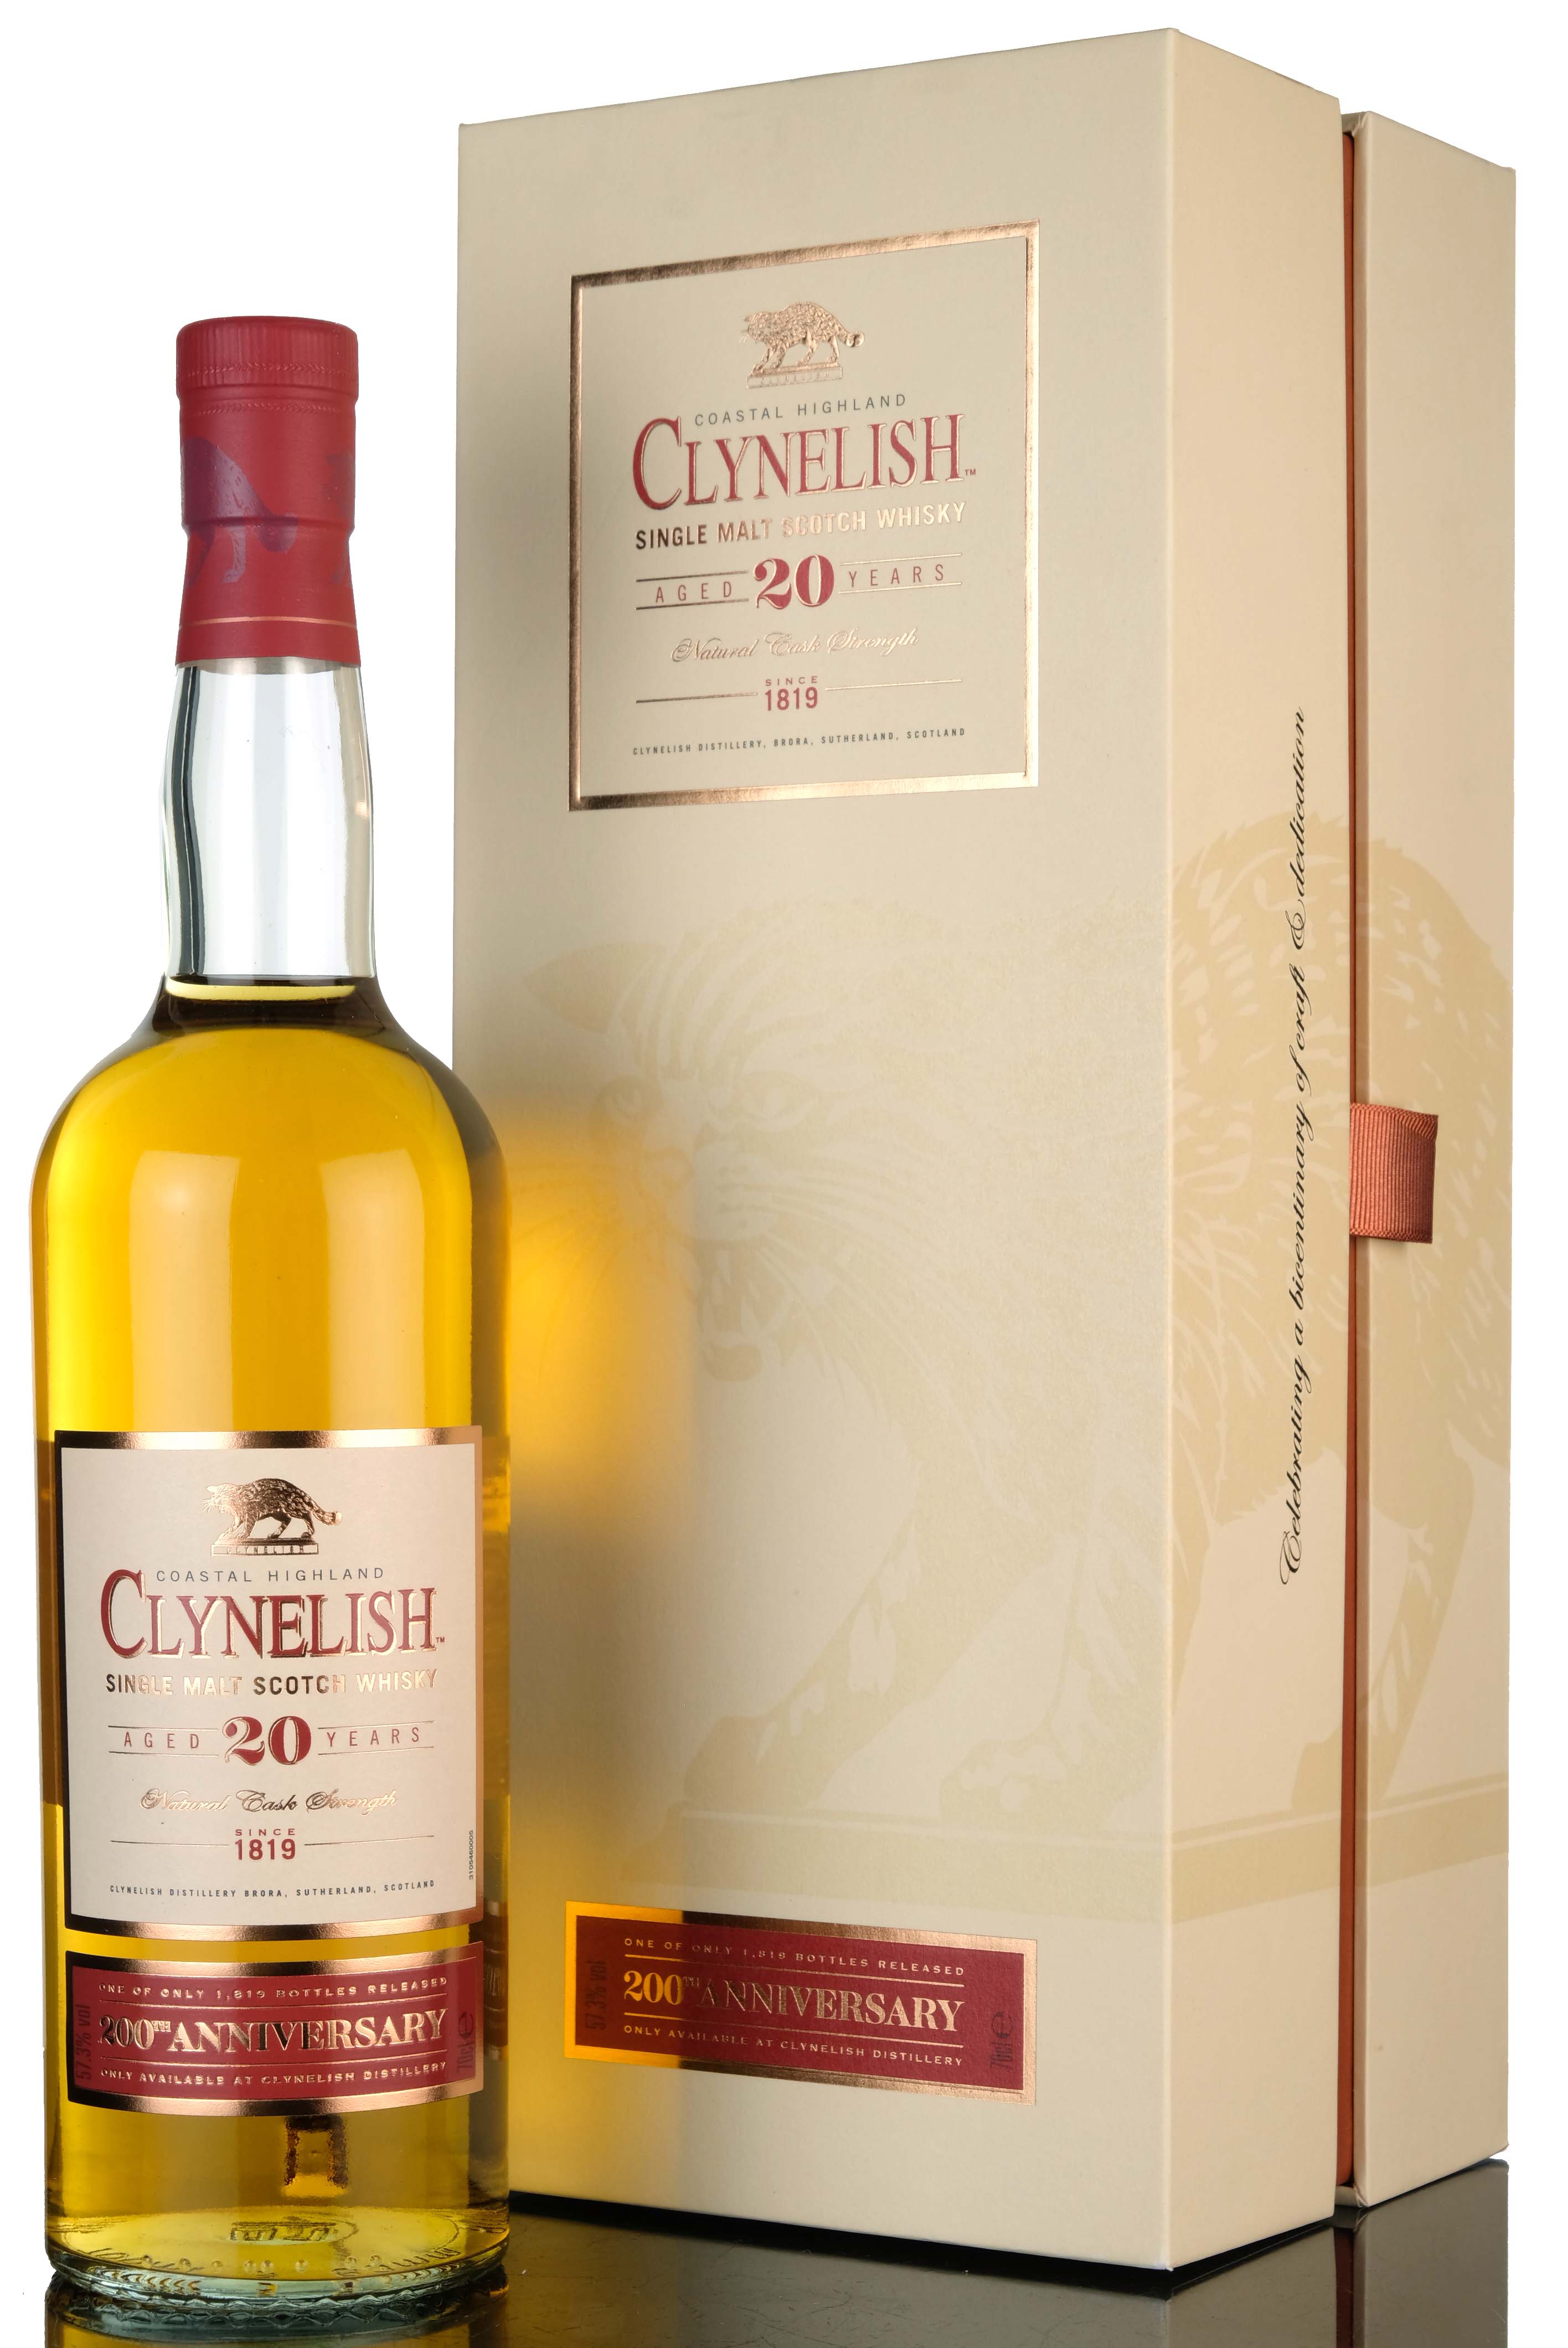 Clynelish 20 Year Old - 200th Anniversary - Distillery Exclusive